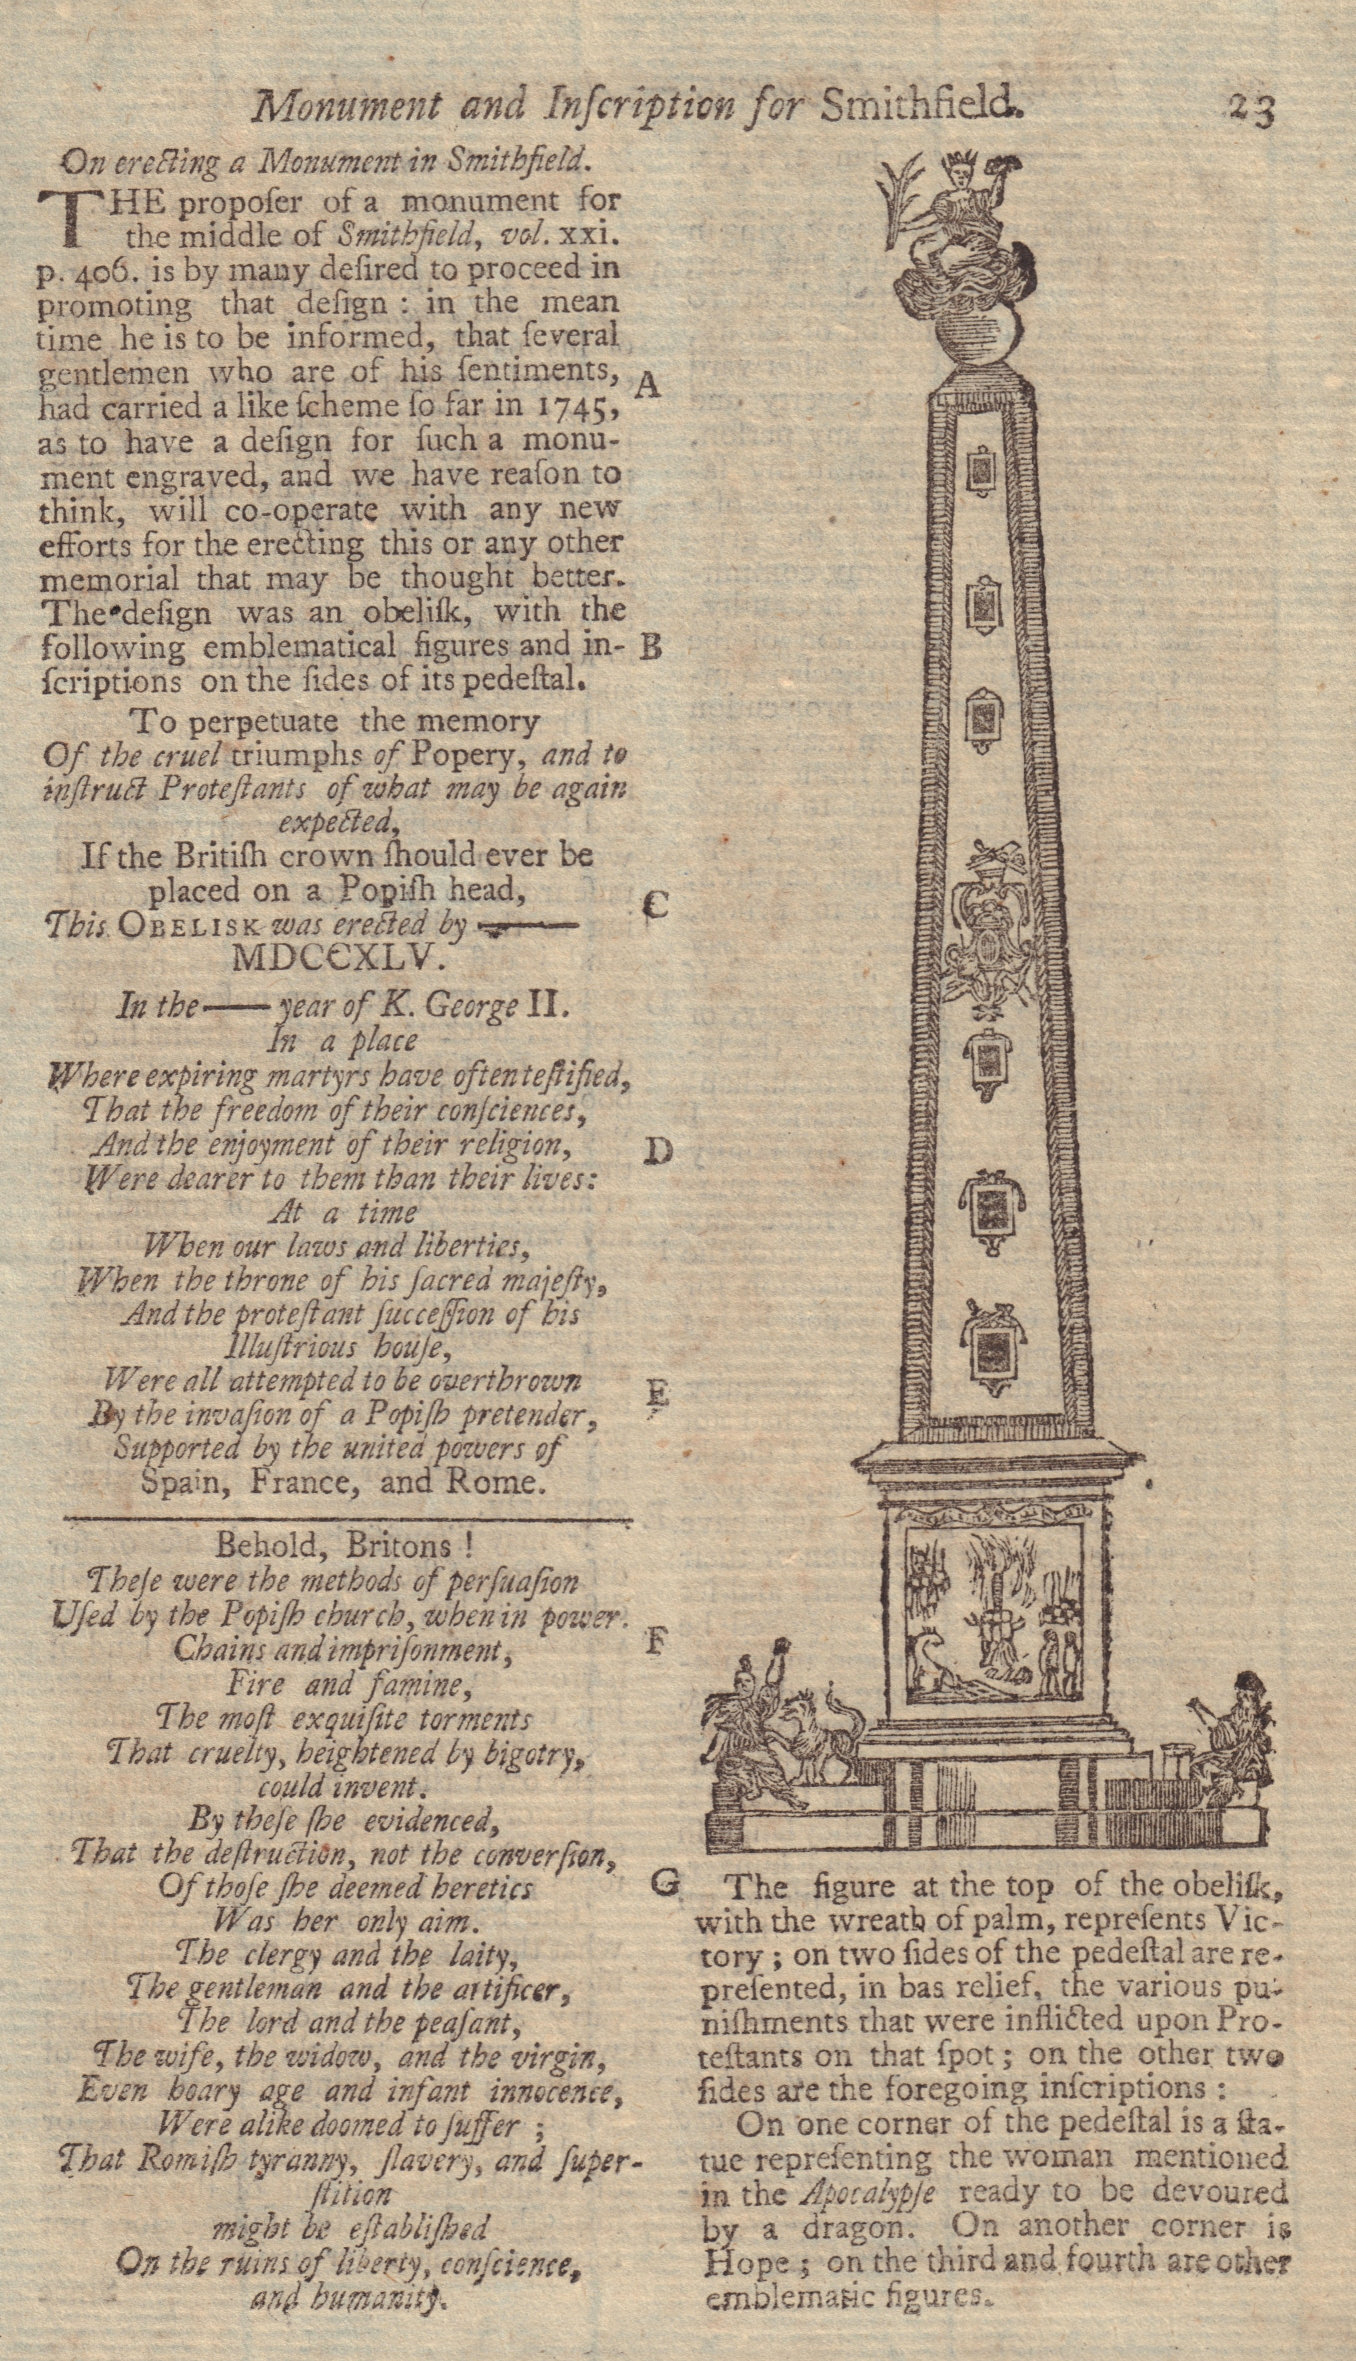 Associate Product Obelisk proposed to be erected in Smithfield, London. GENTS MAG 1752 old print